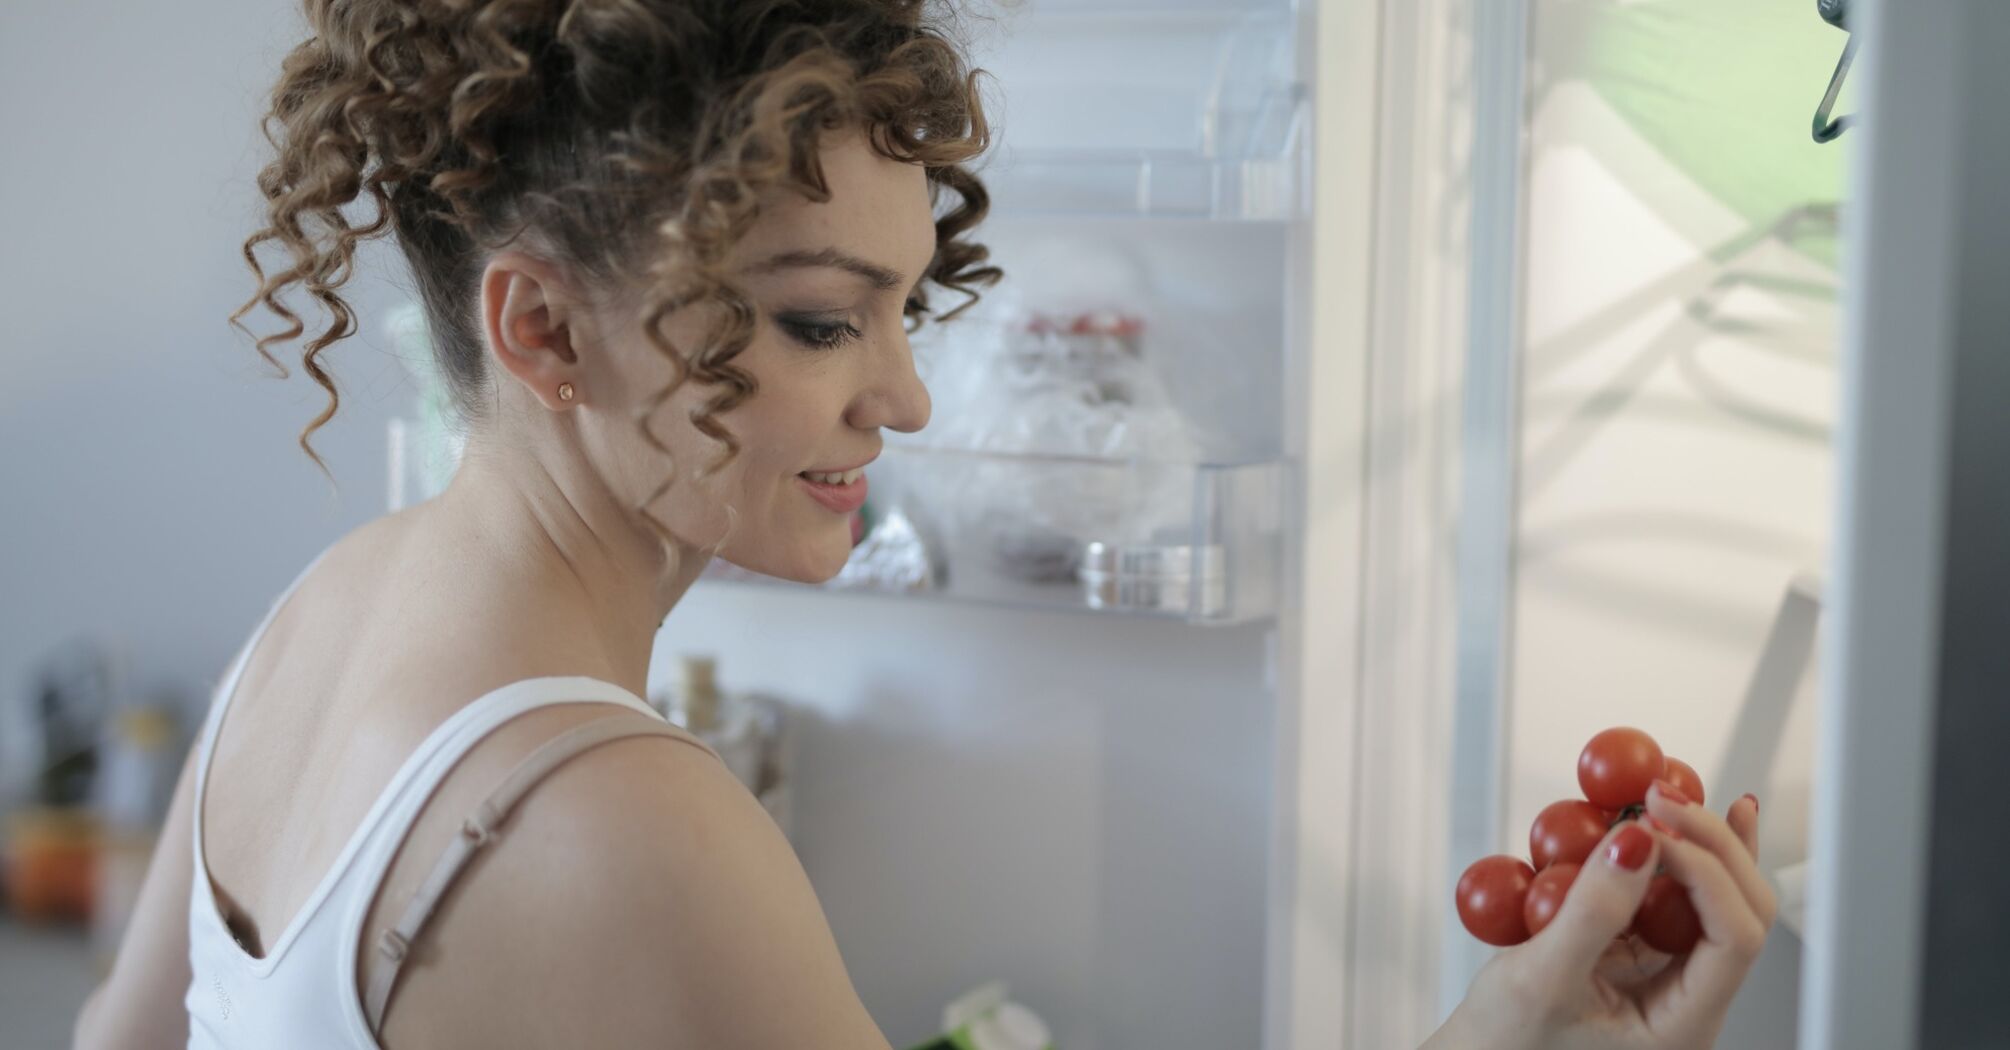 How to deal with unpleasant odors in the refrigerator: Time-tested tips